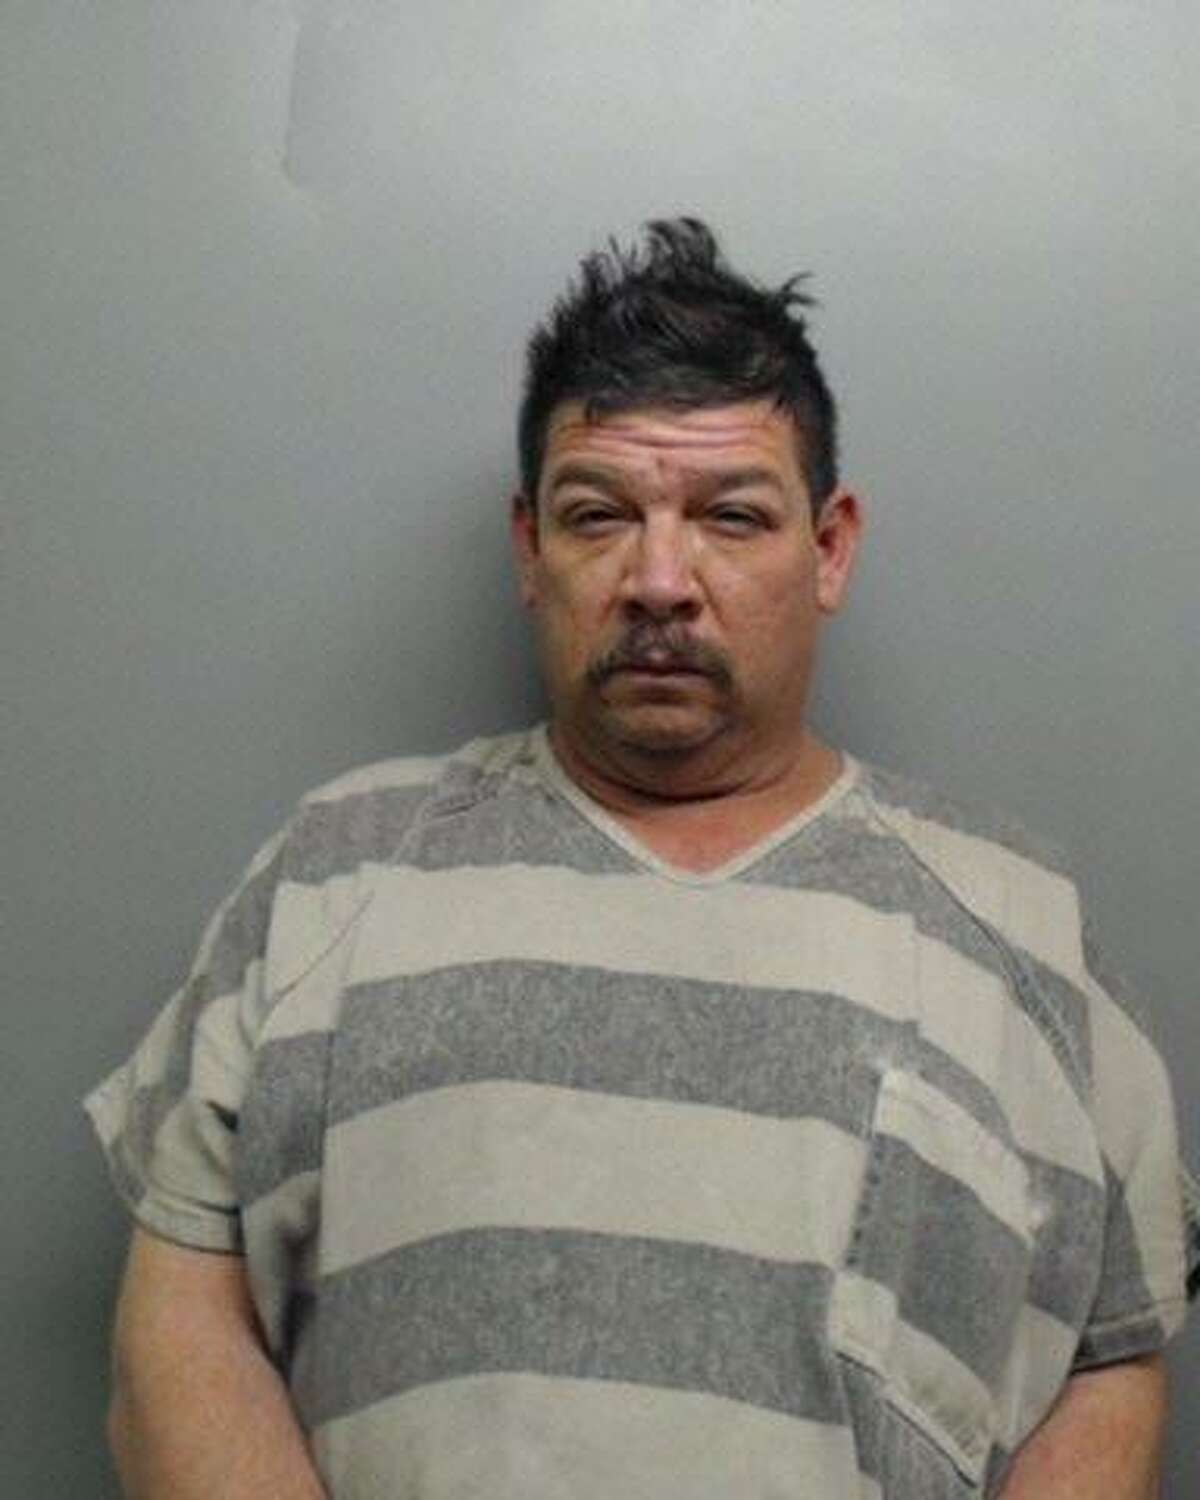 Mauricio Fidel Valdez, 49, criminal mischief/possession of a controlled substance